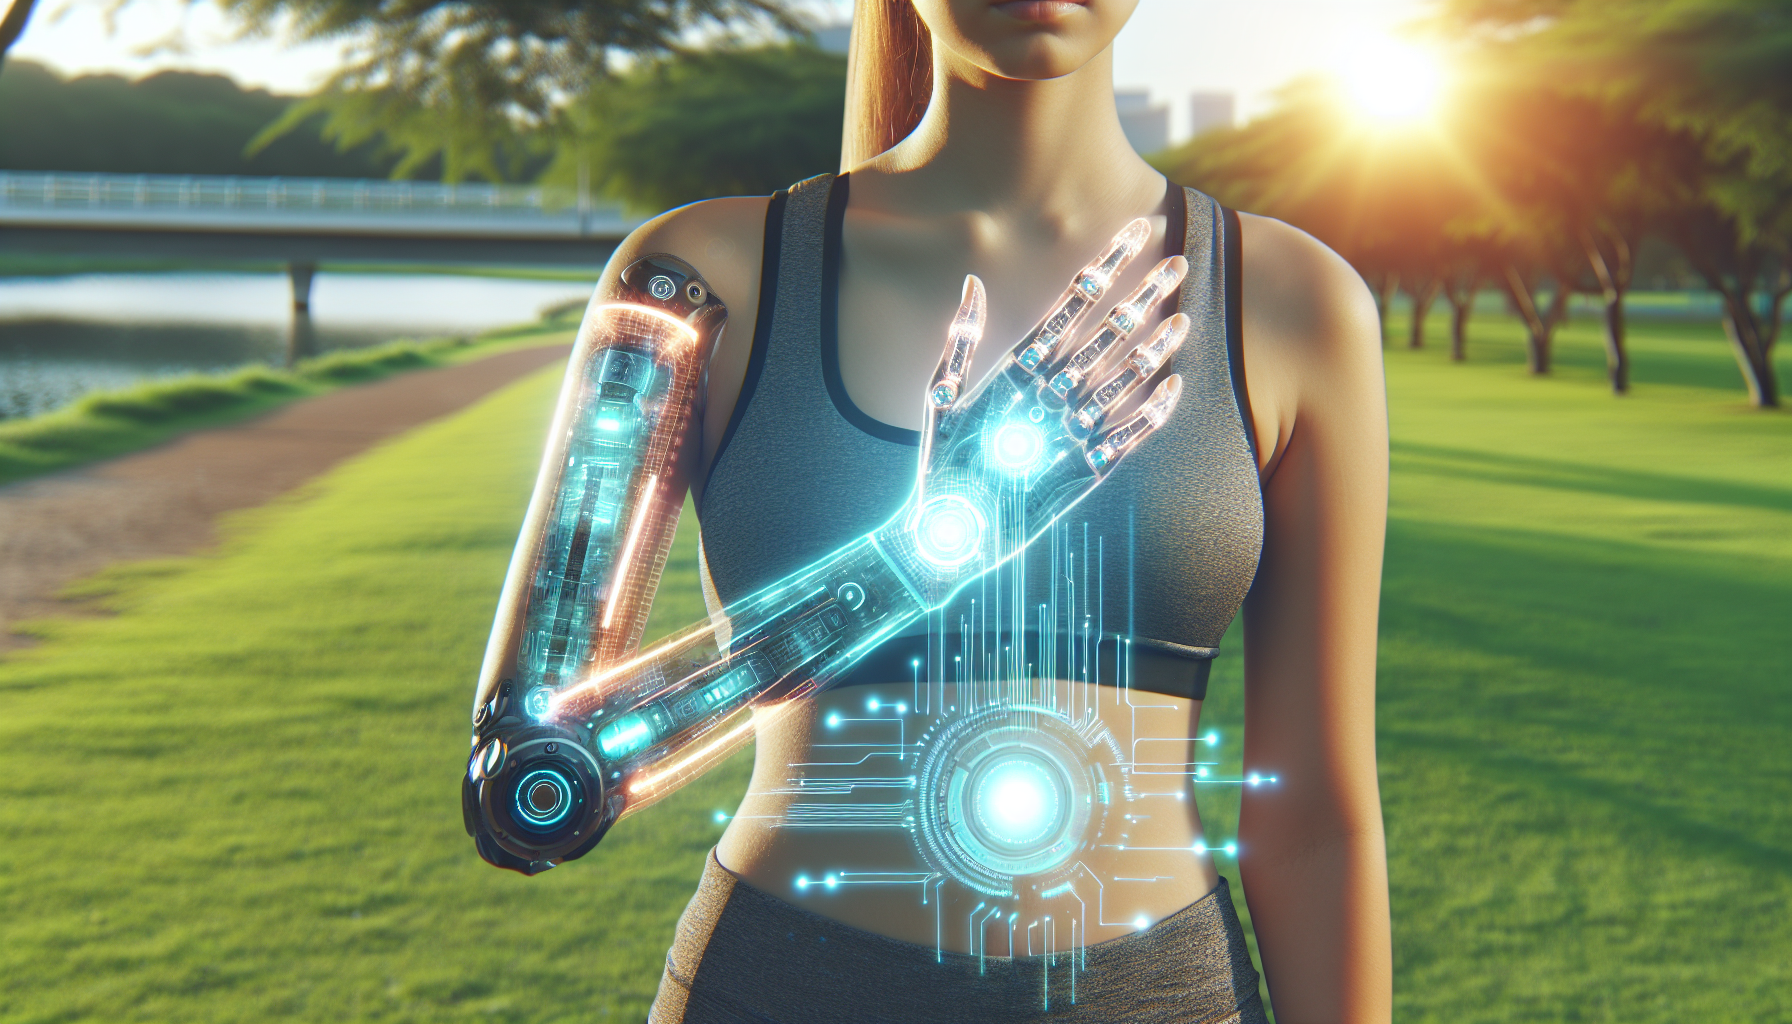 An illustration of advanced prosthetic devices utilizing artificial intelligence and haptic feedback for improved quality of life for amputees.